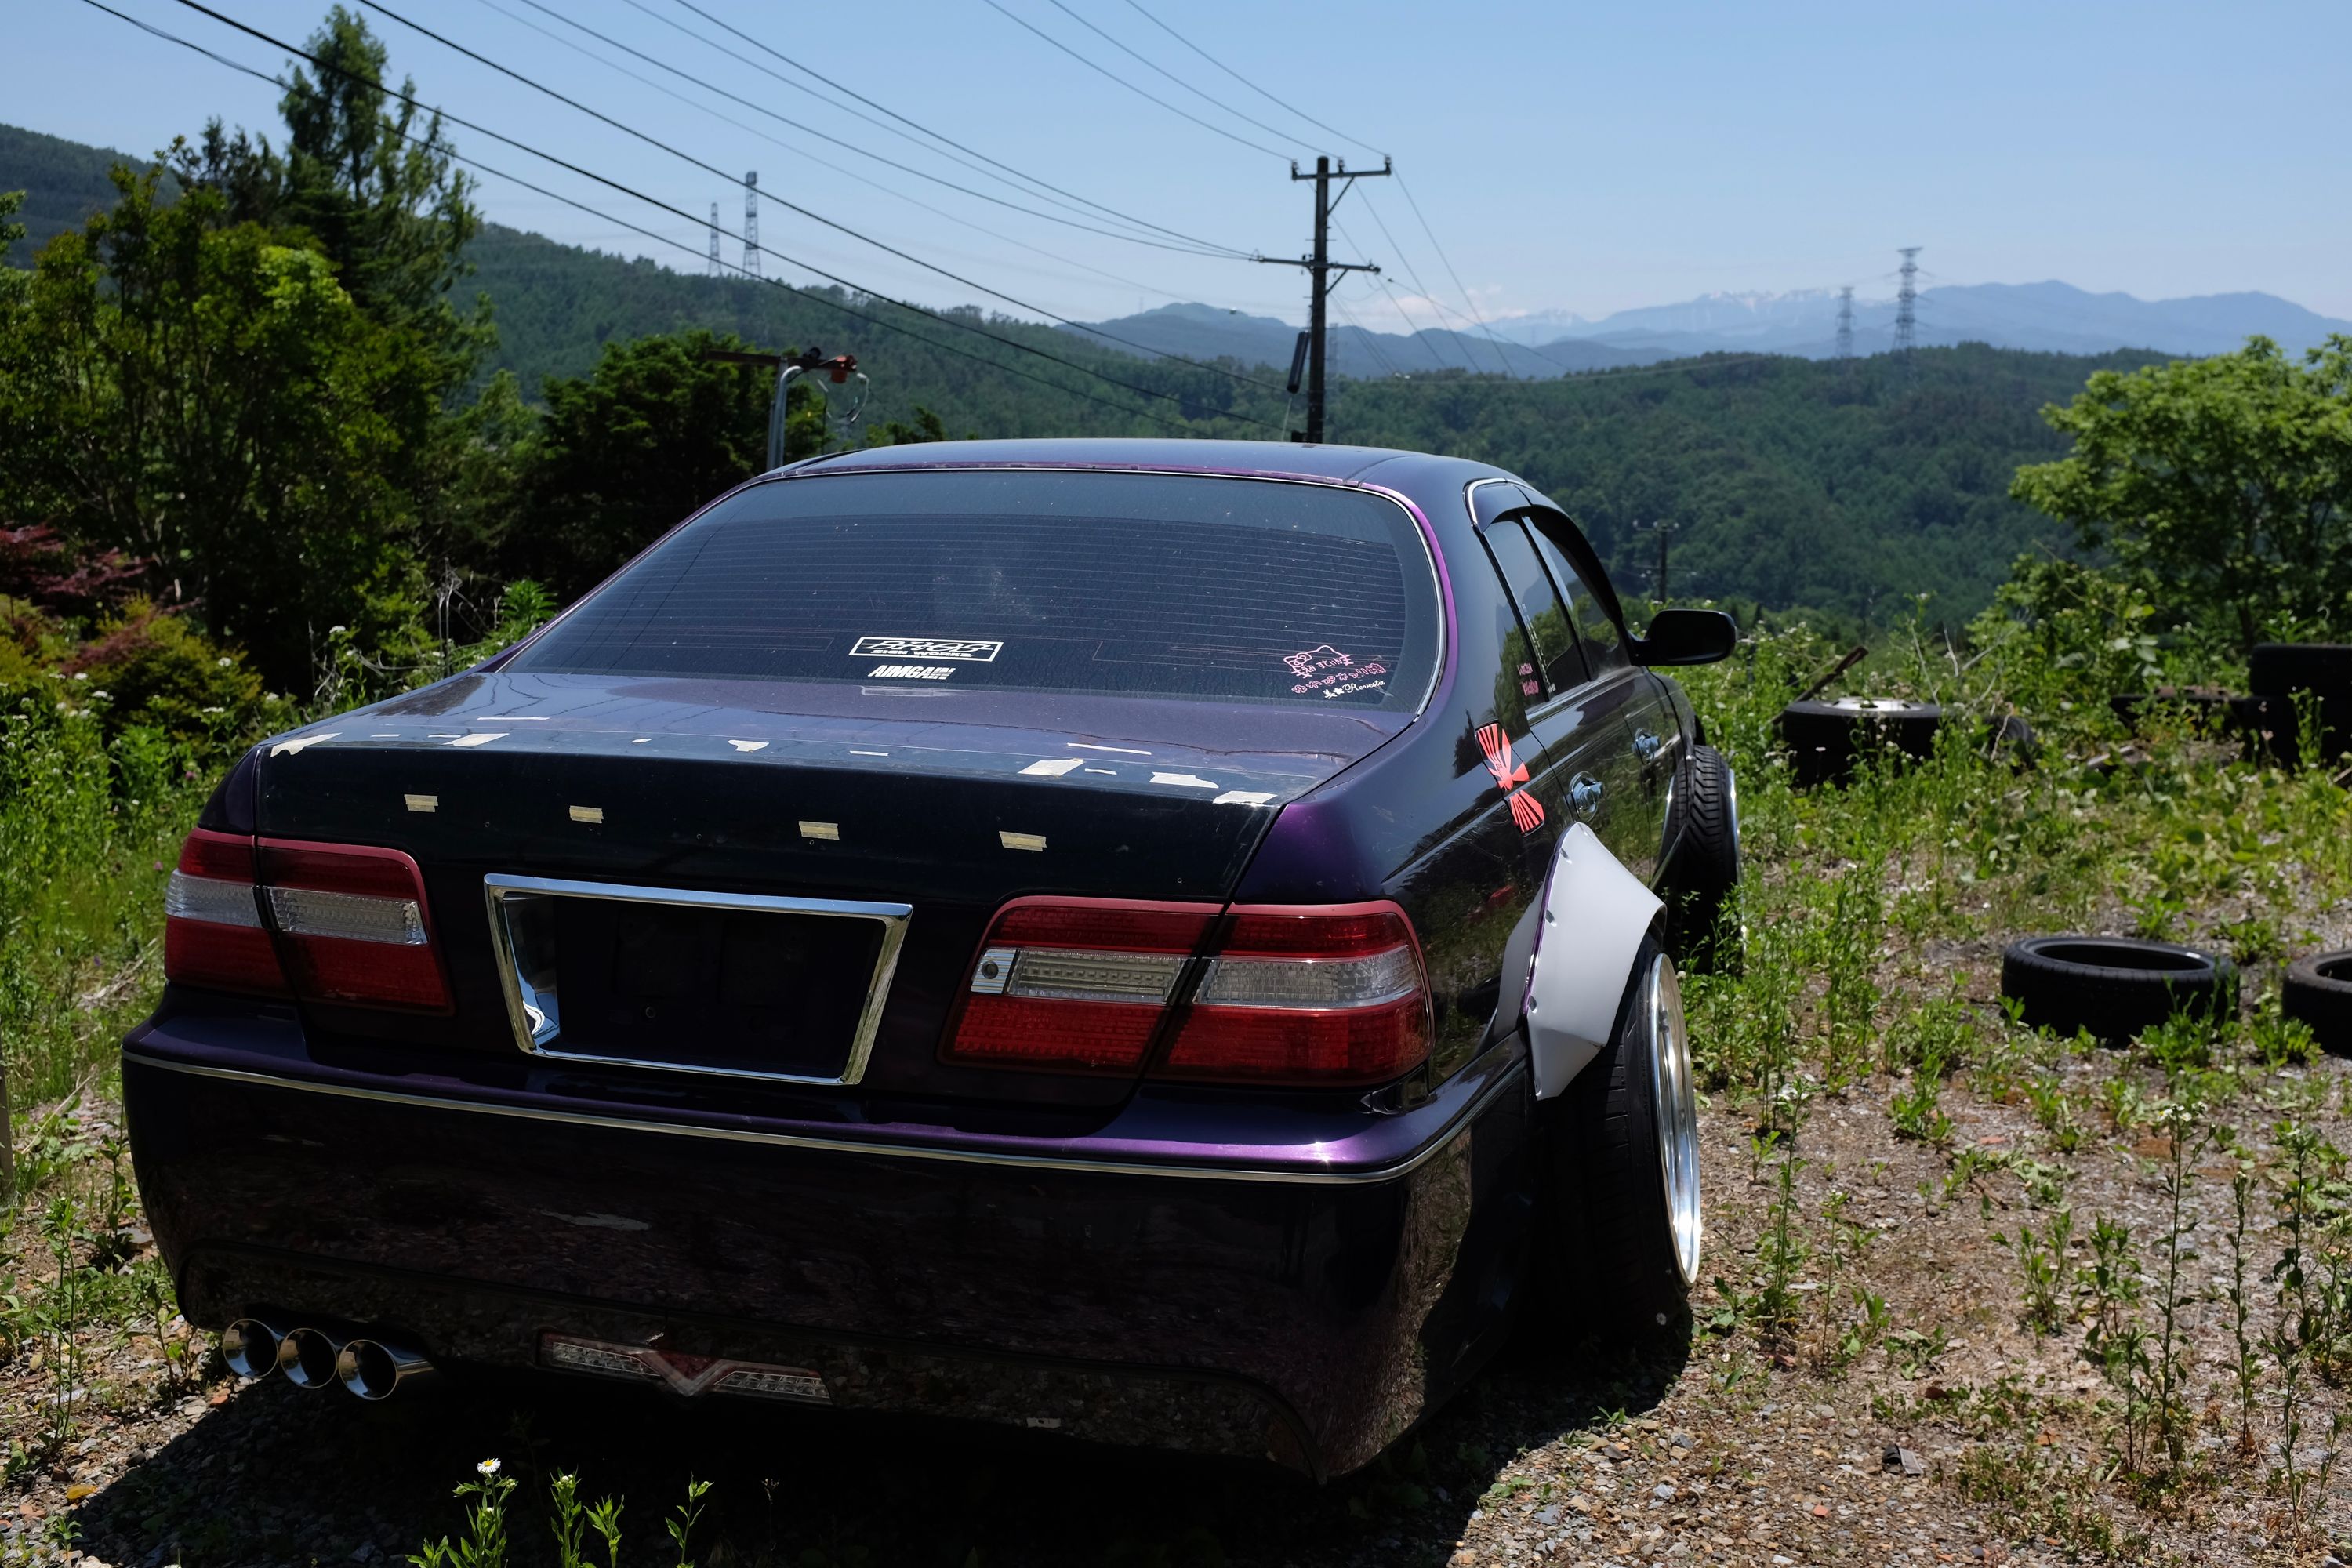 Rear view of the same car, with mountains on the horizon.